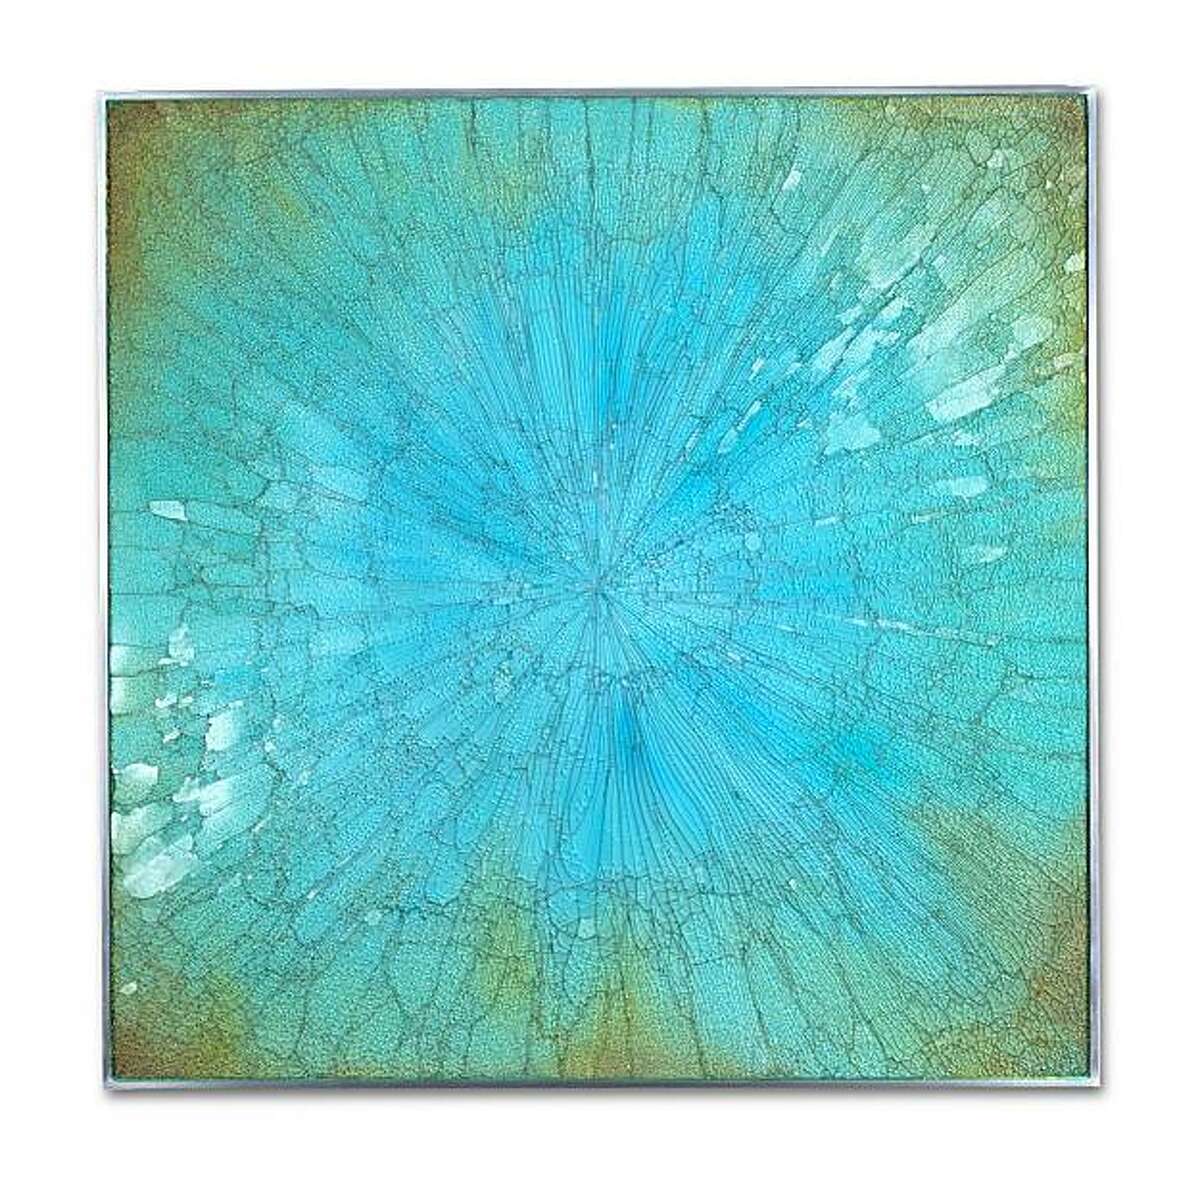 eglomise artist Cassandria Blackmore uses a shattered-glass technique to create abstract paintings.